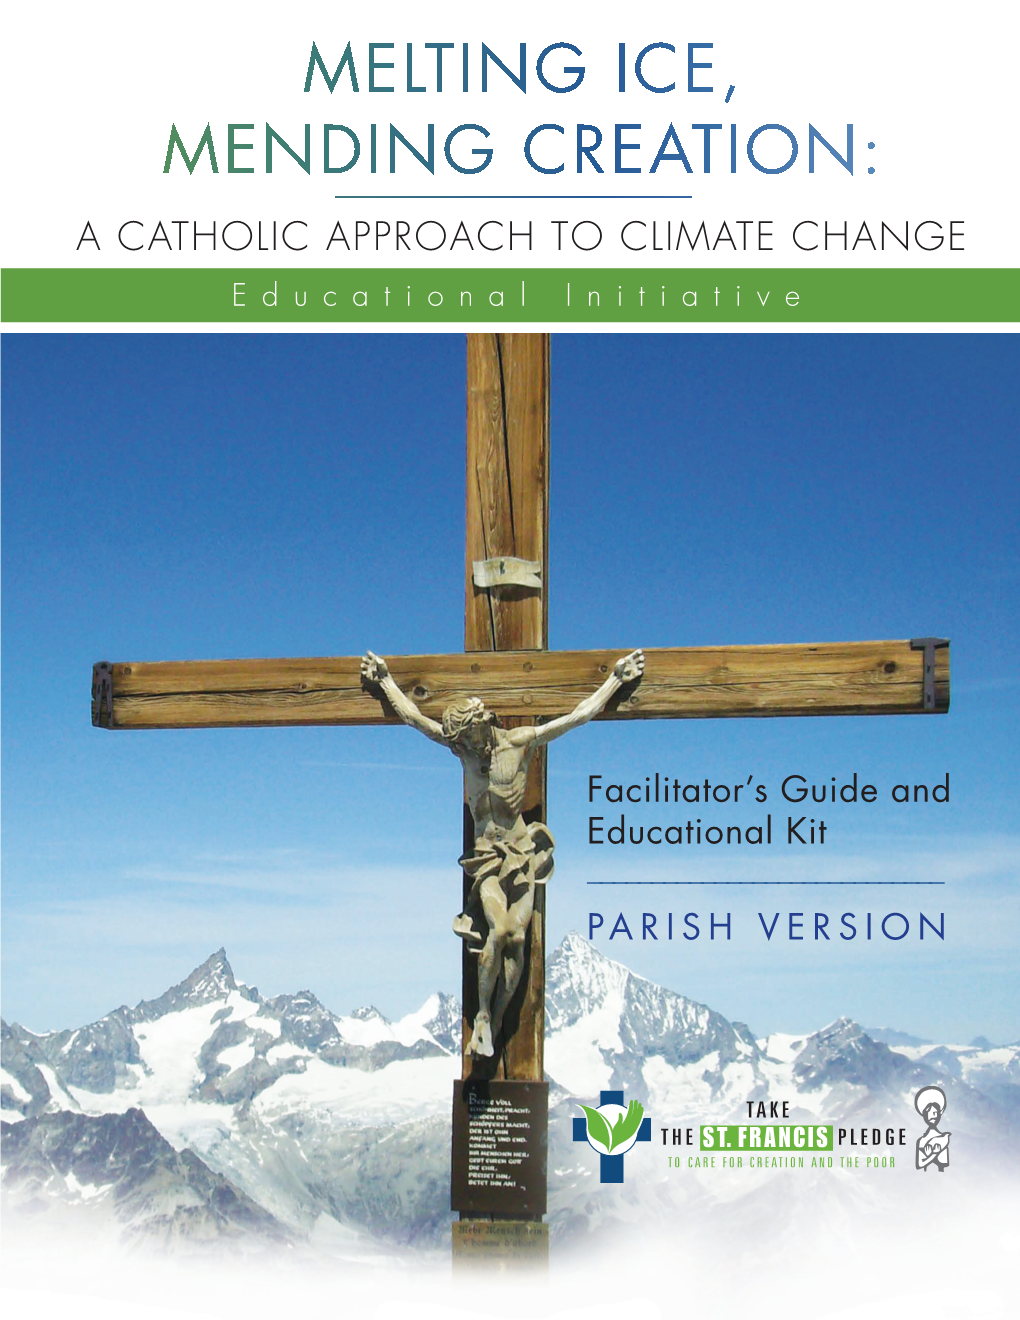 MELTING ICE, MENDING CREATION: a Catholic Approach to Climate Change OUTCOMES at the END of the 90-MINUTE PROGRAM, YOU and YOUR COMMUNITY WILL